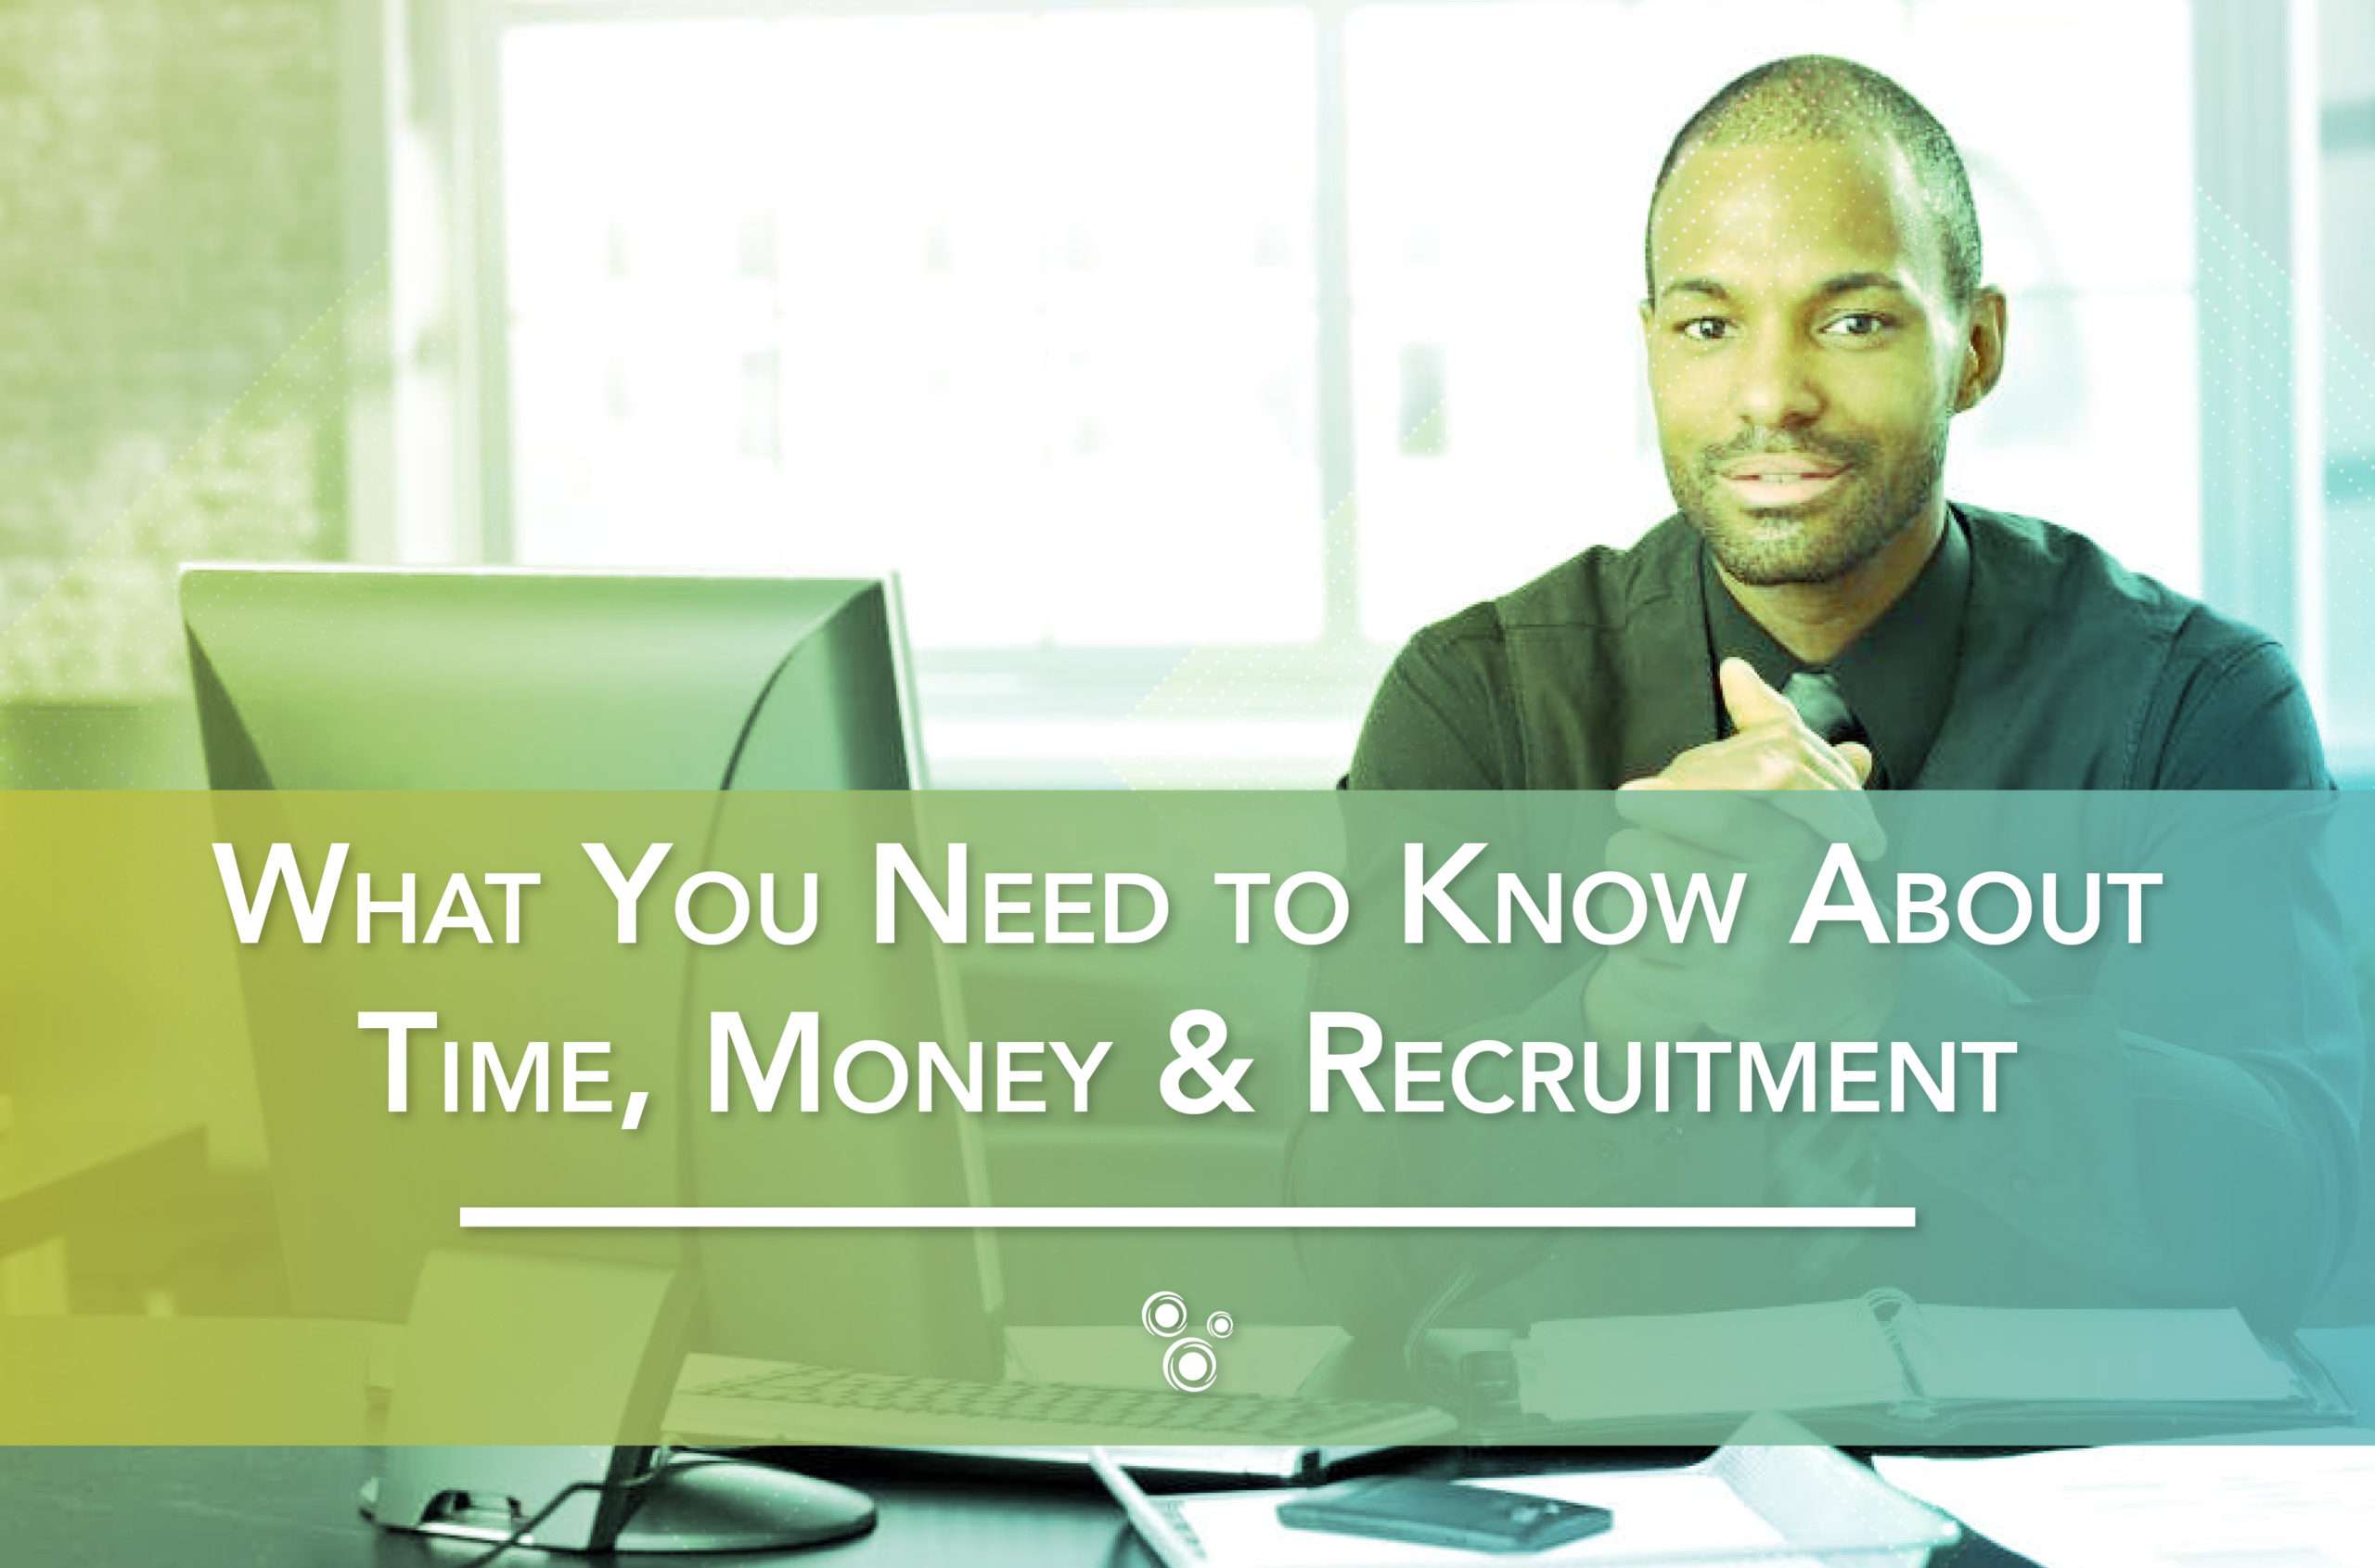 What You Need to Know About Time, Money & Recruitment